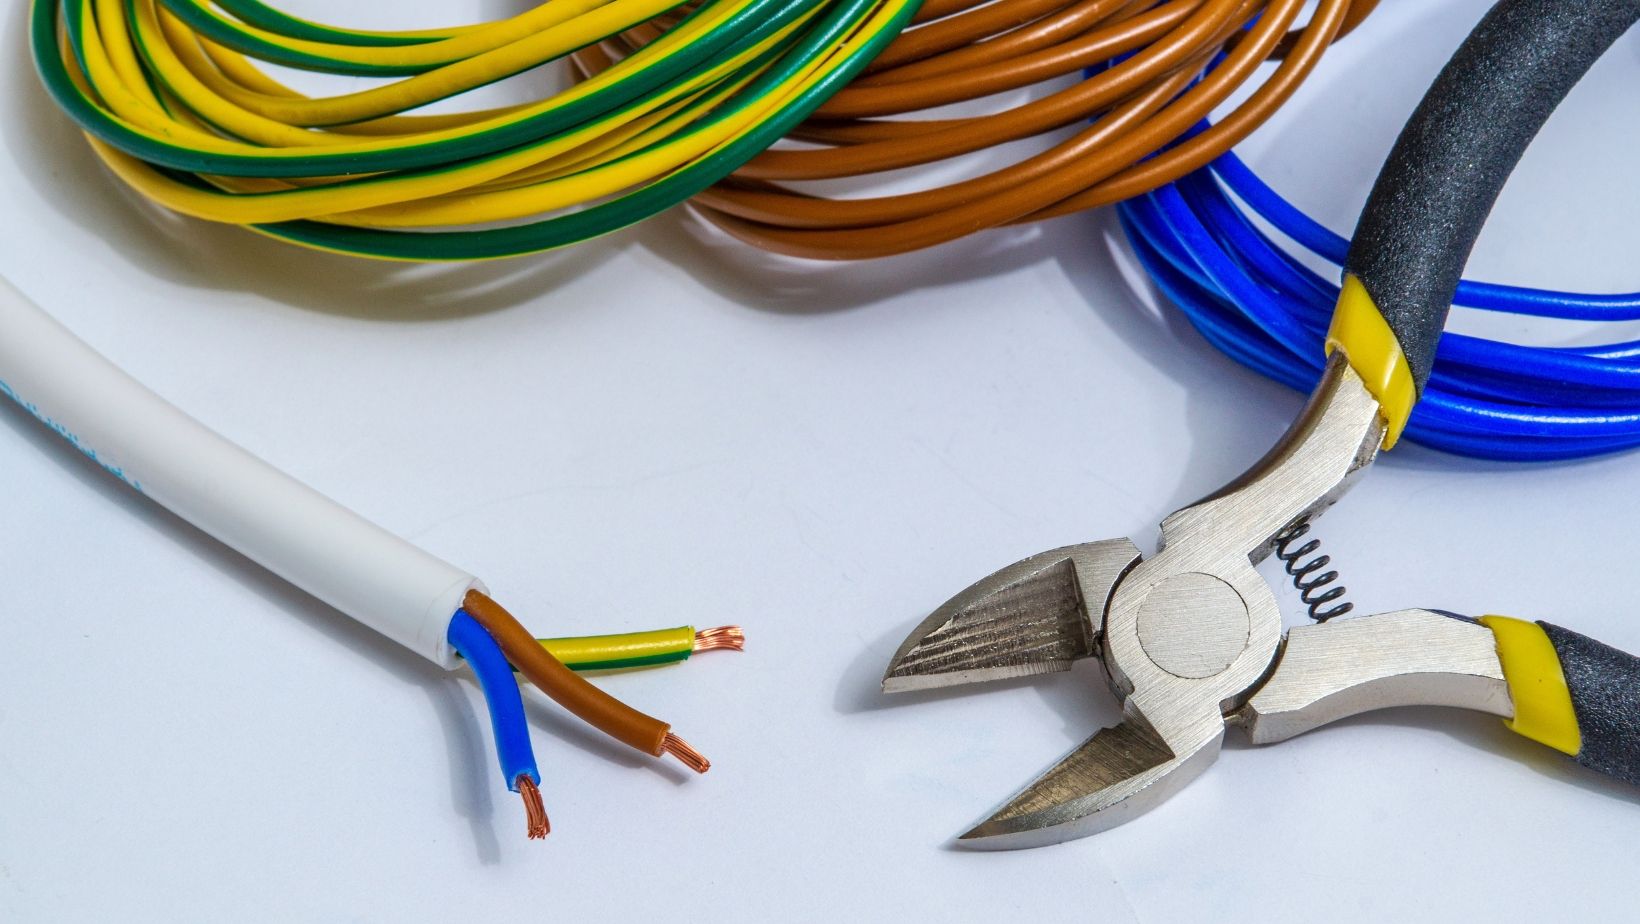 An electrical crimping pliers and electrical wires on a floor